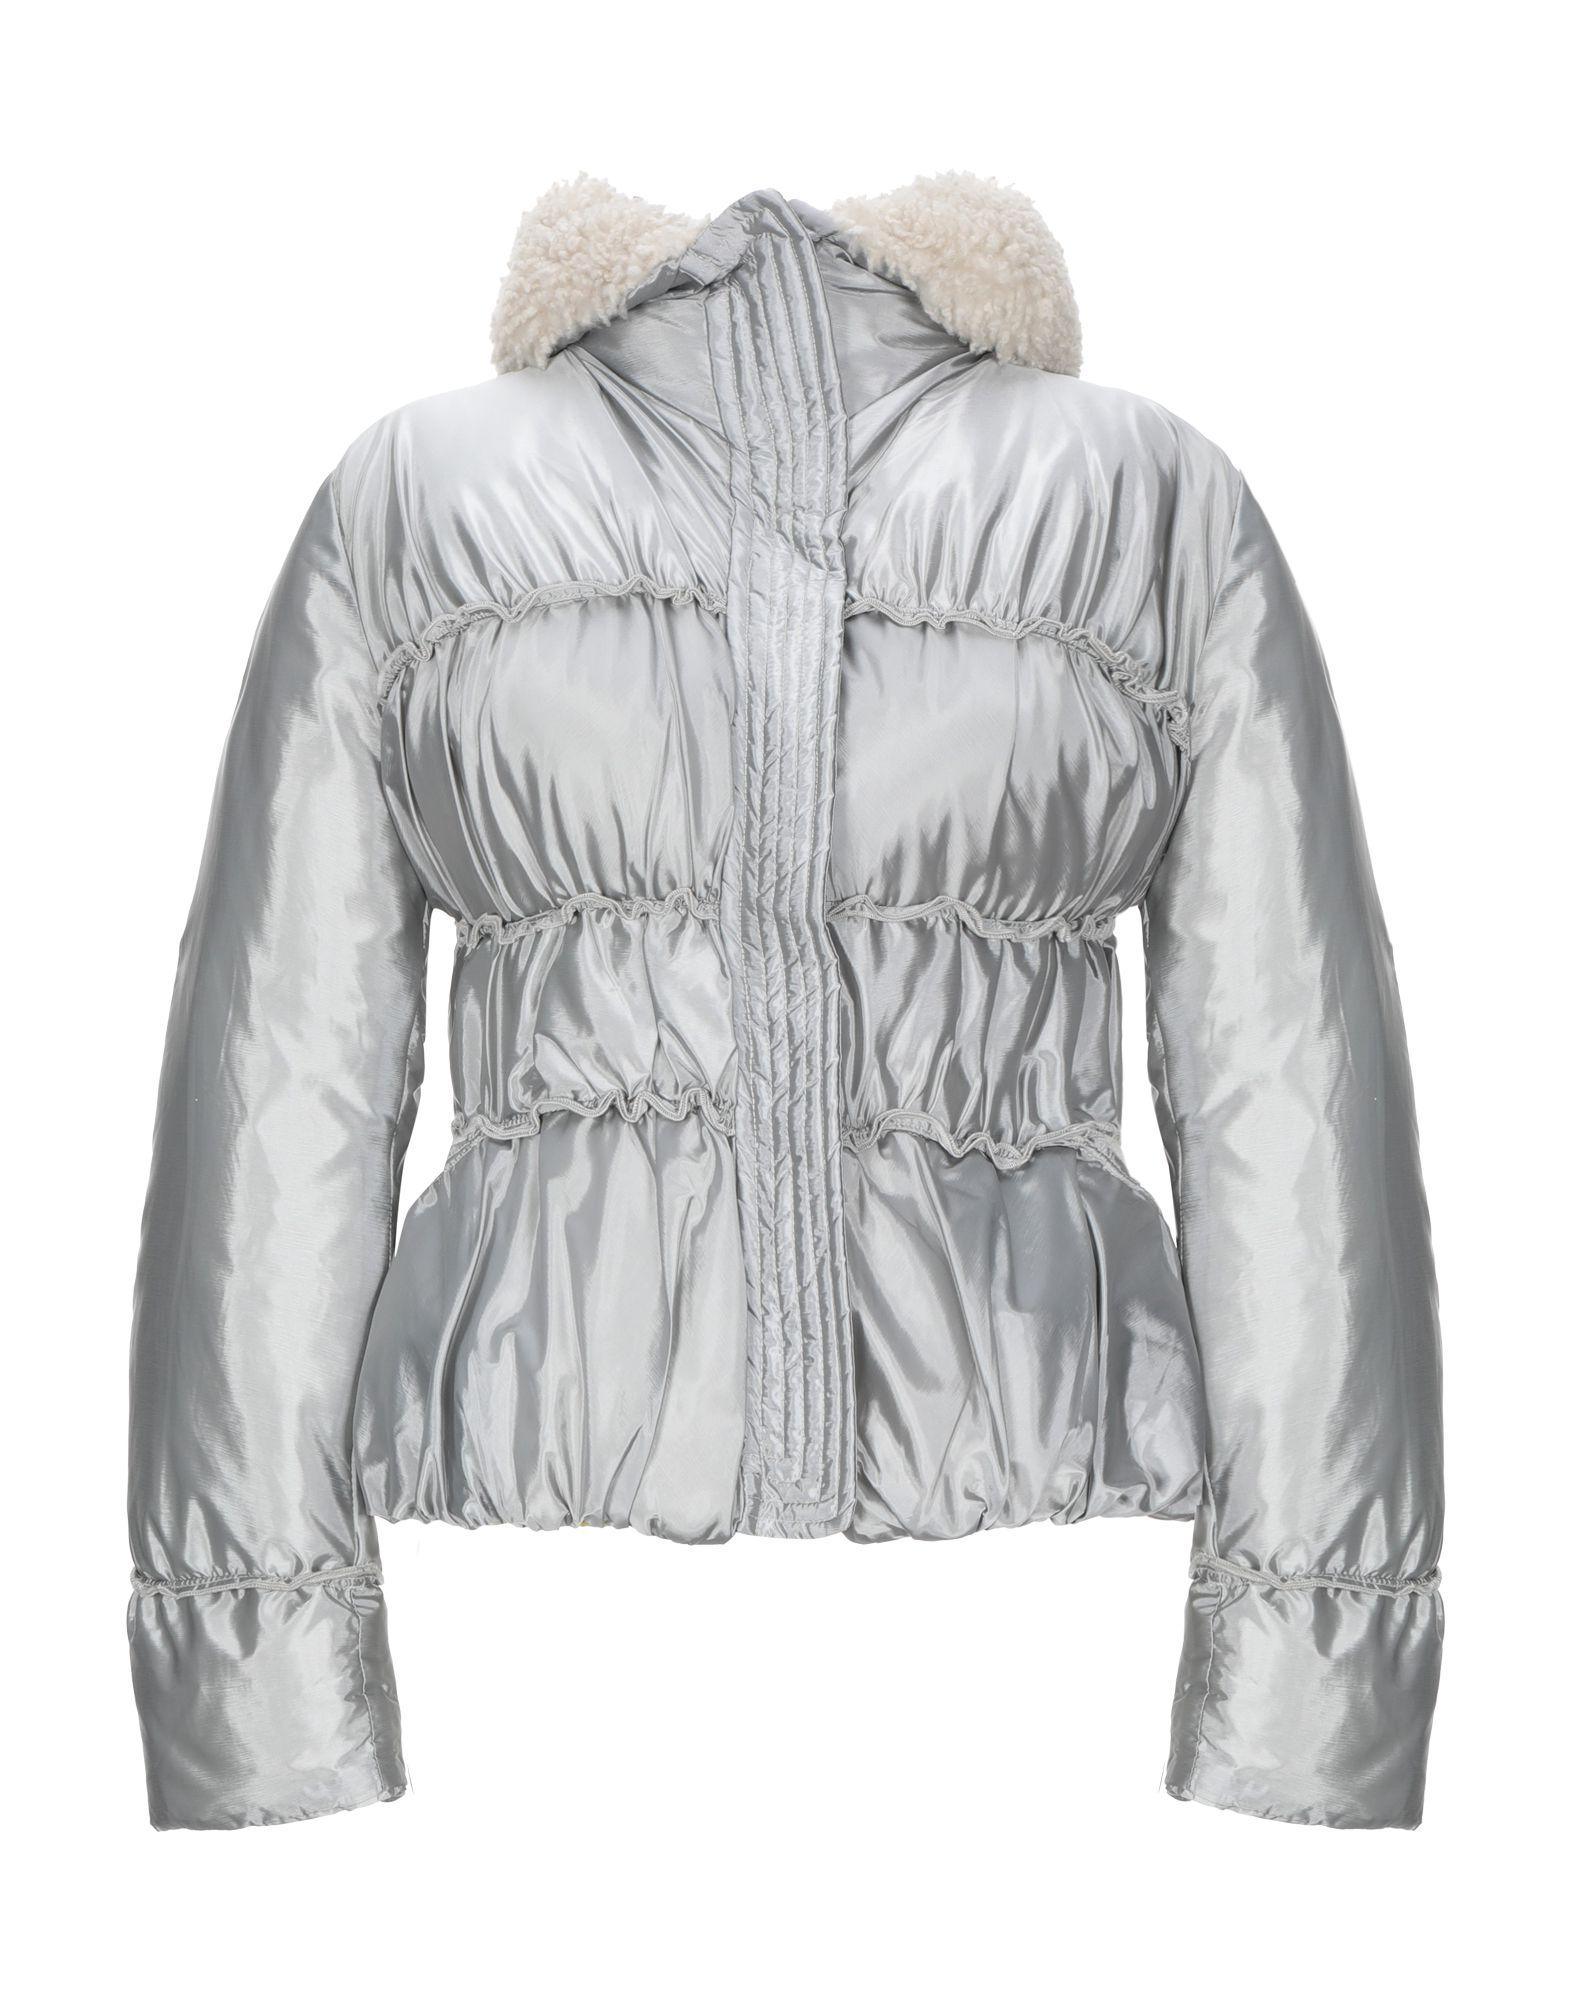 Ermanno Scervino Synthetic Jacket in Light Grey (Gray) - Lyst